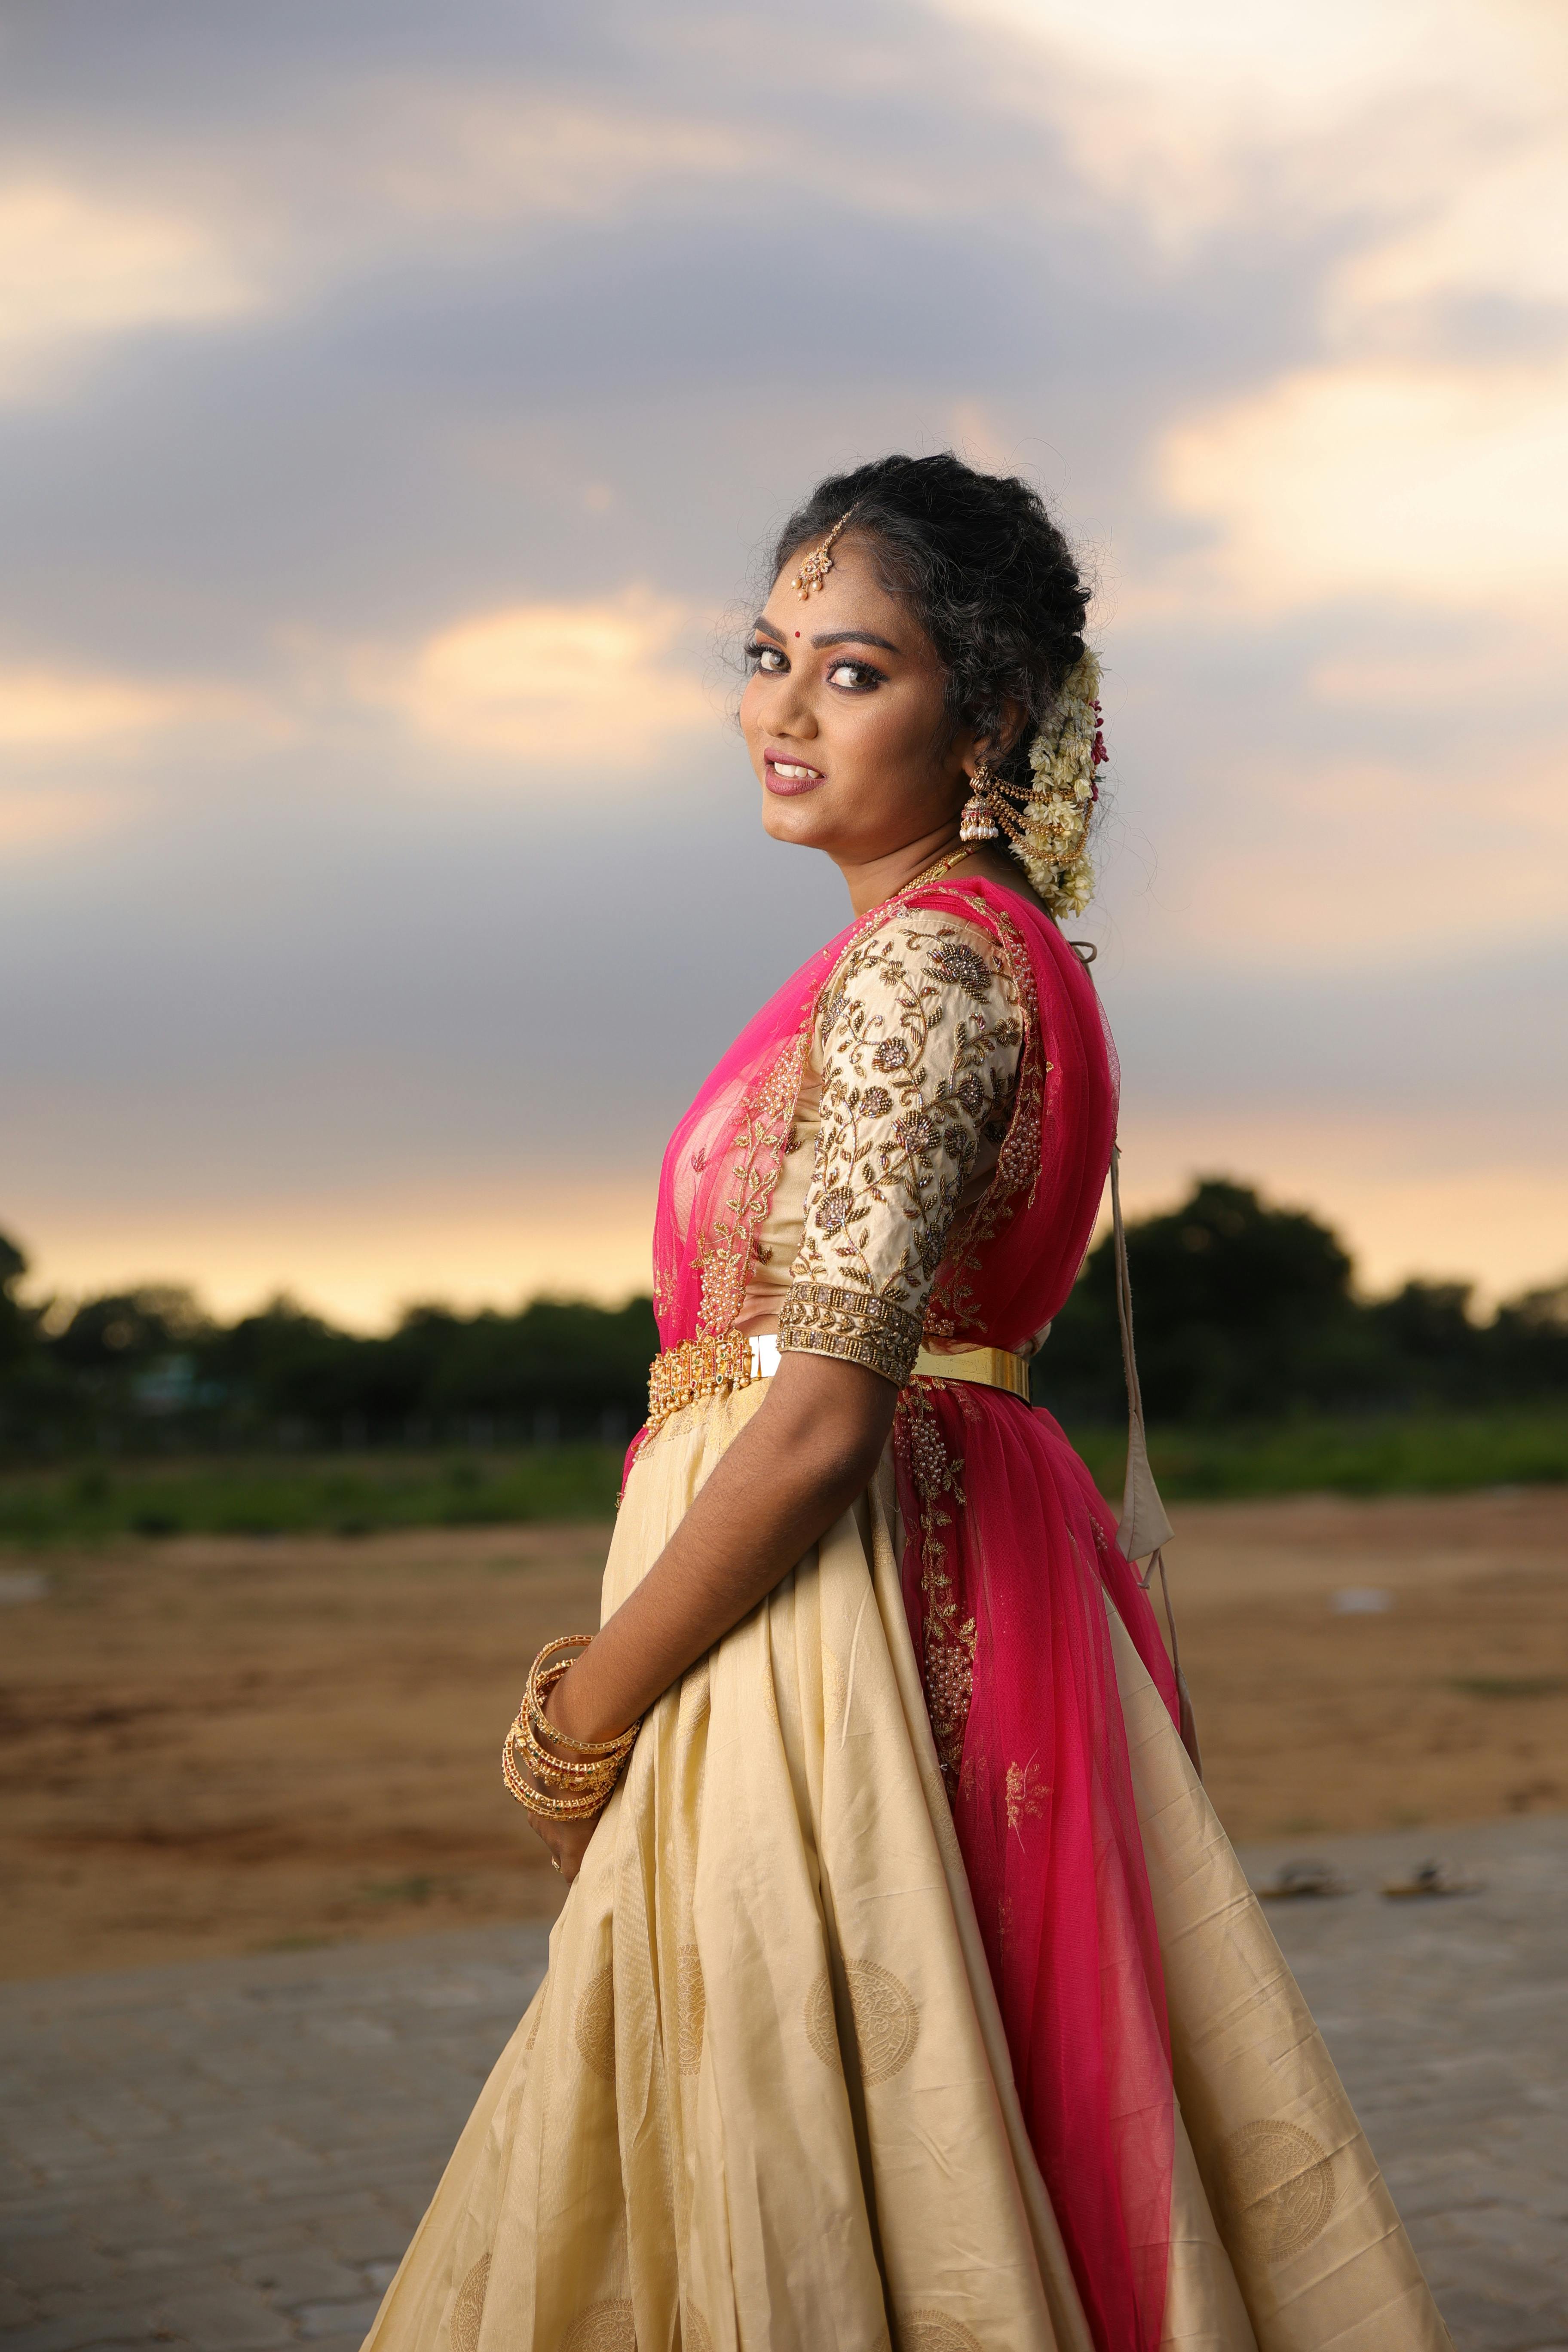 Red Veds: Pre Wedding Poses in Gown | Check Now